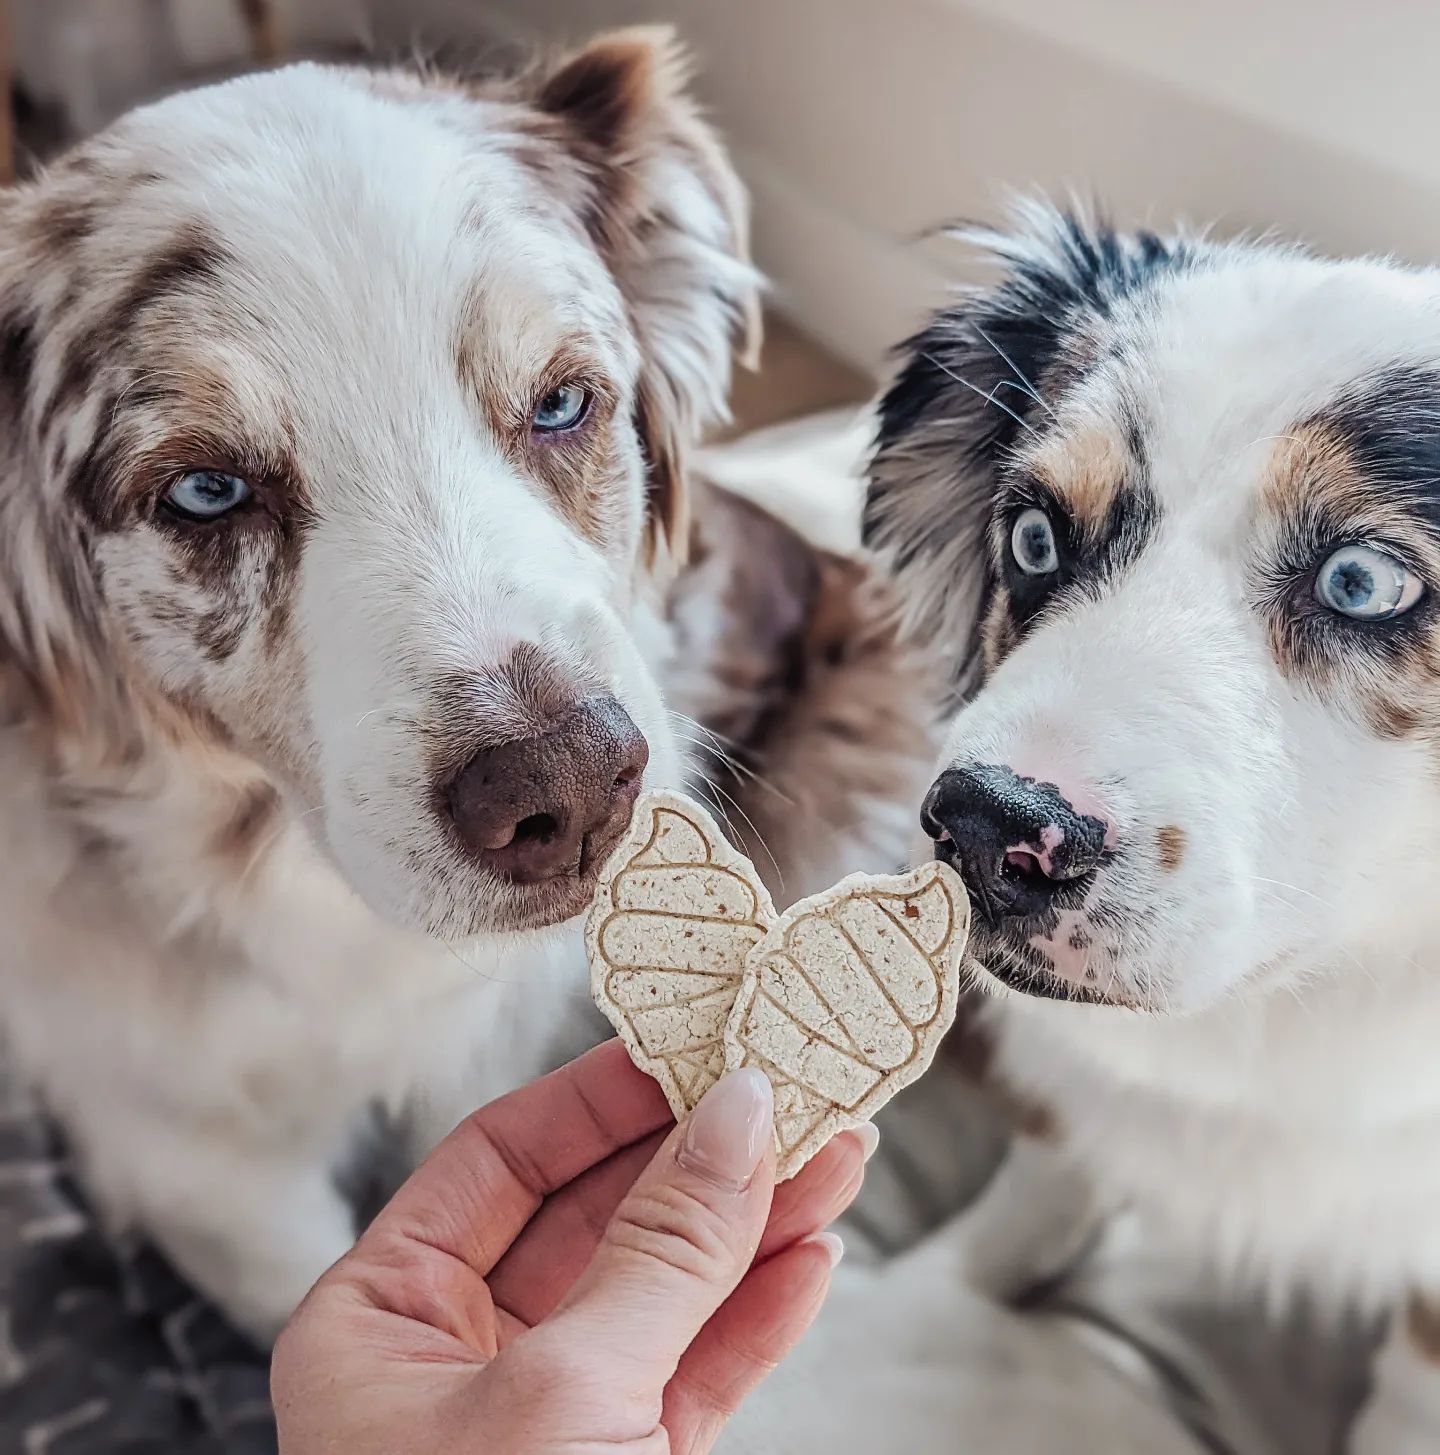 Spring is finally here! 💐 @littlepaws.dogtreats Pina Colada 🍦 cookies dropped today! Grab them now before we sell out!

Exclusive to MIMI &amp; SOSO